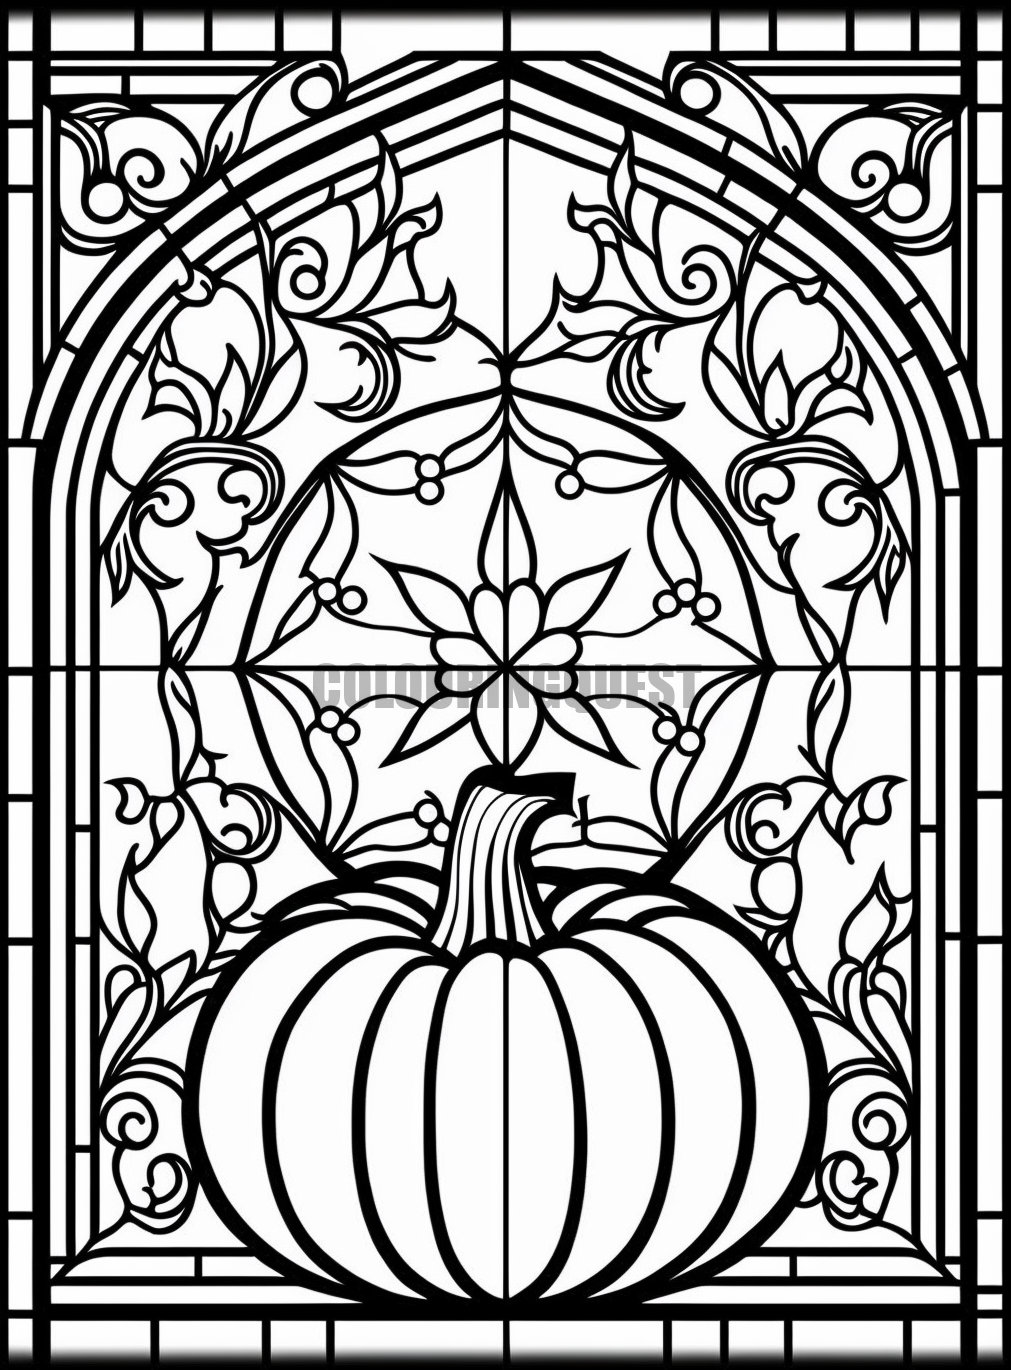 Pumpkin stained glass printable adult coloring page from colouringquest coloring book pages for adults coloring pictures for kids